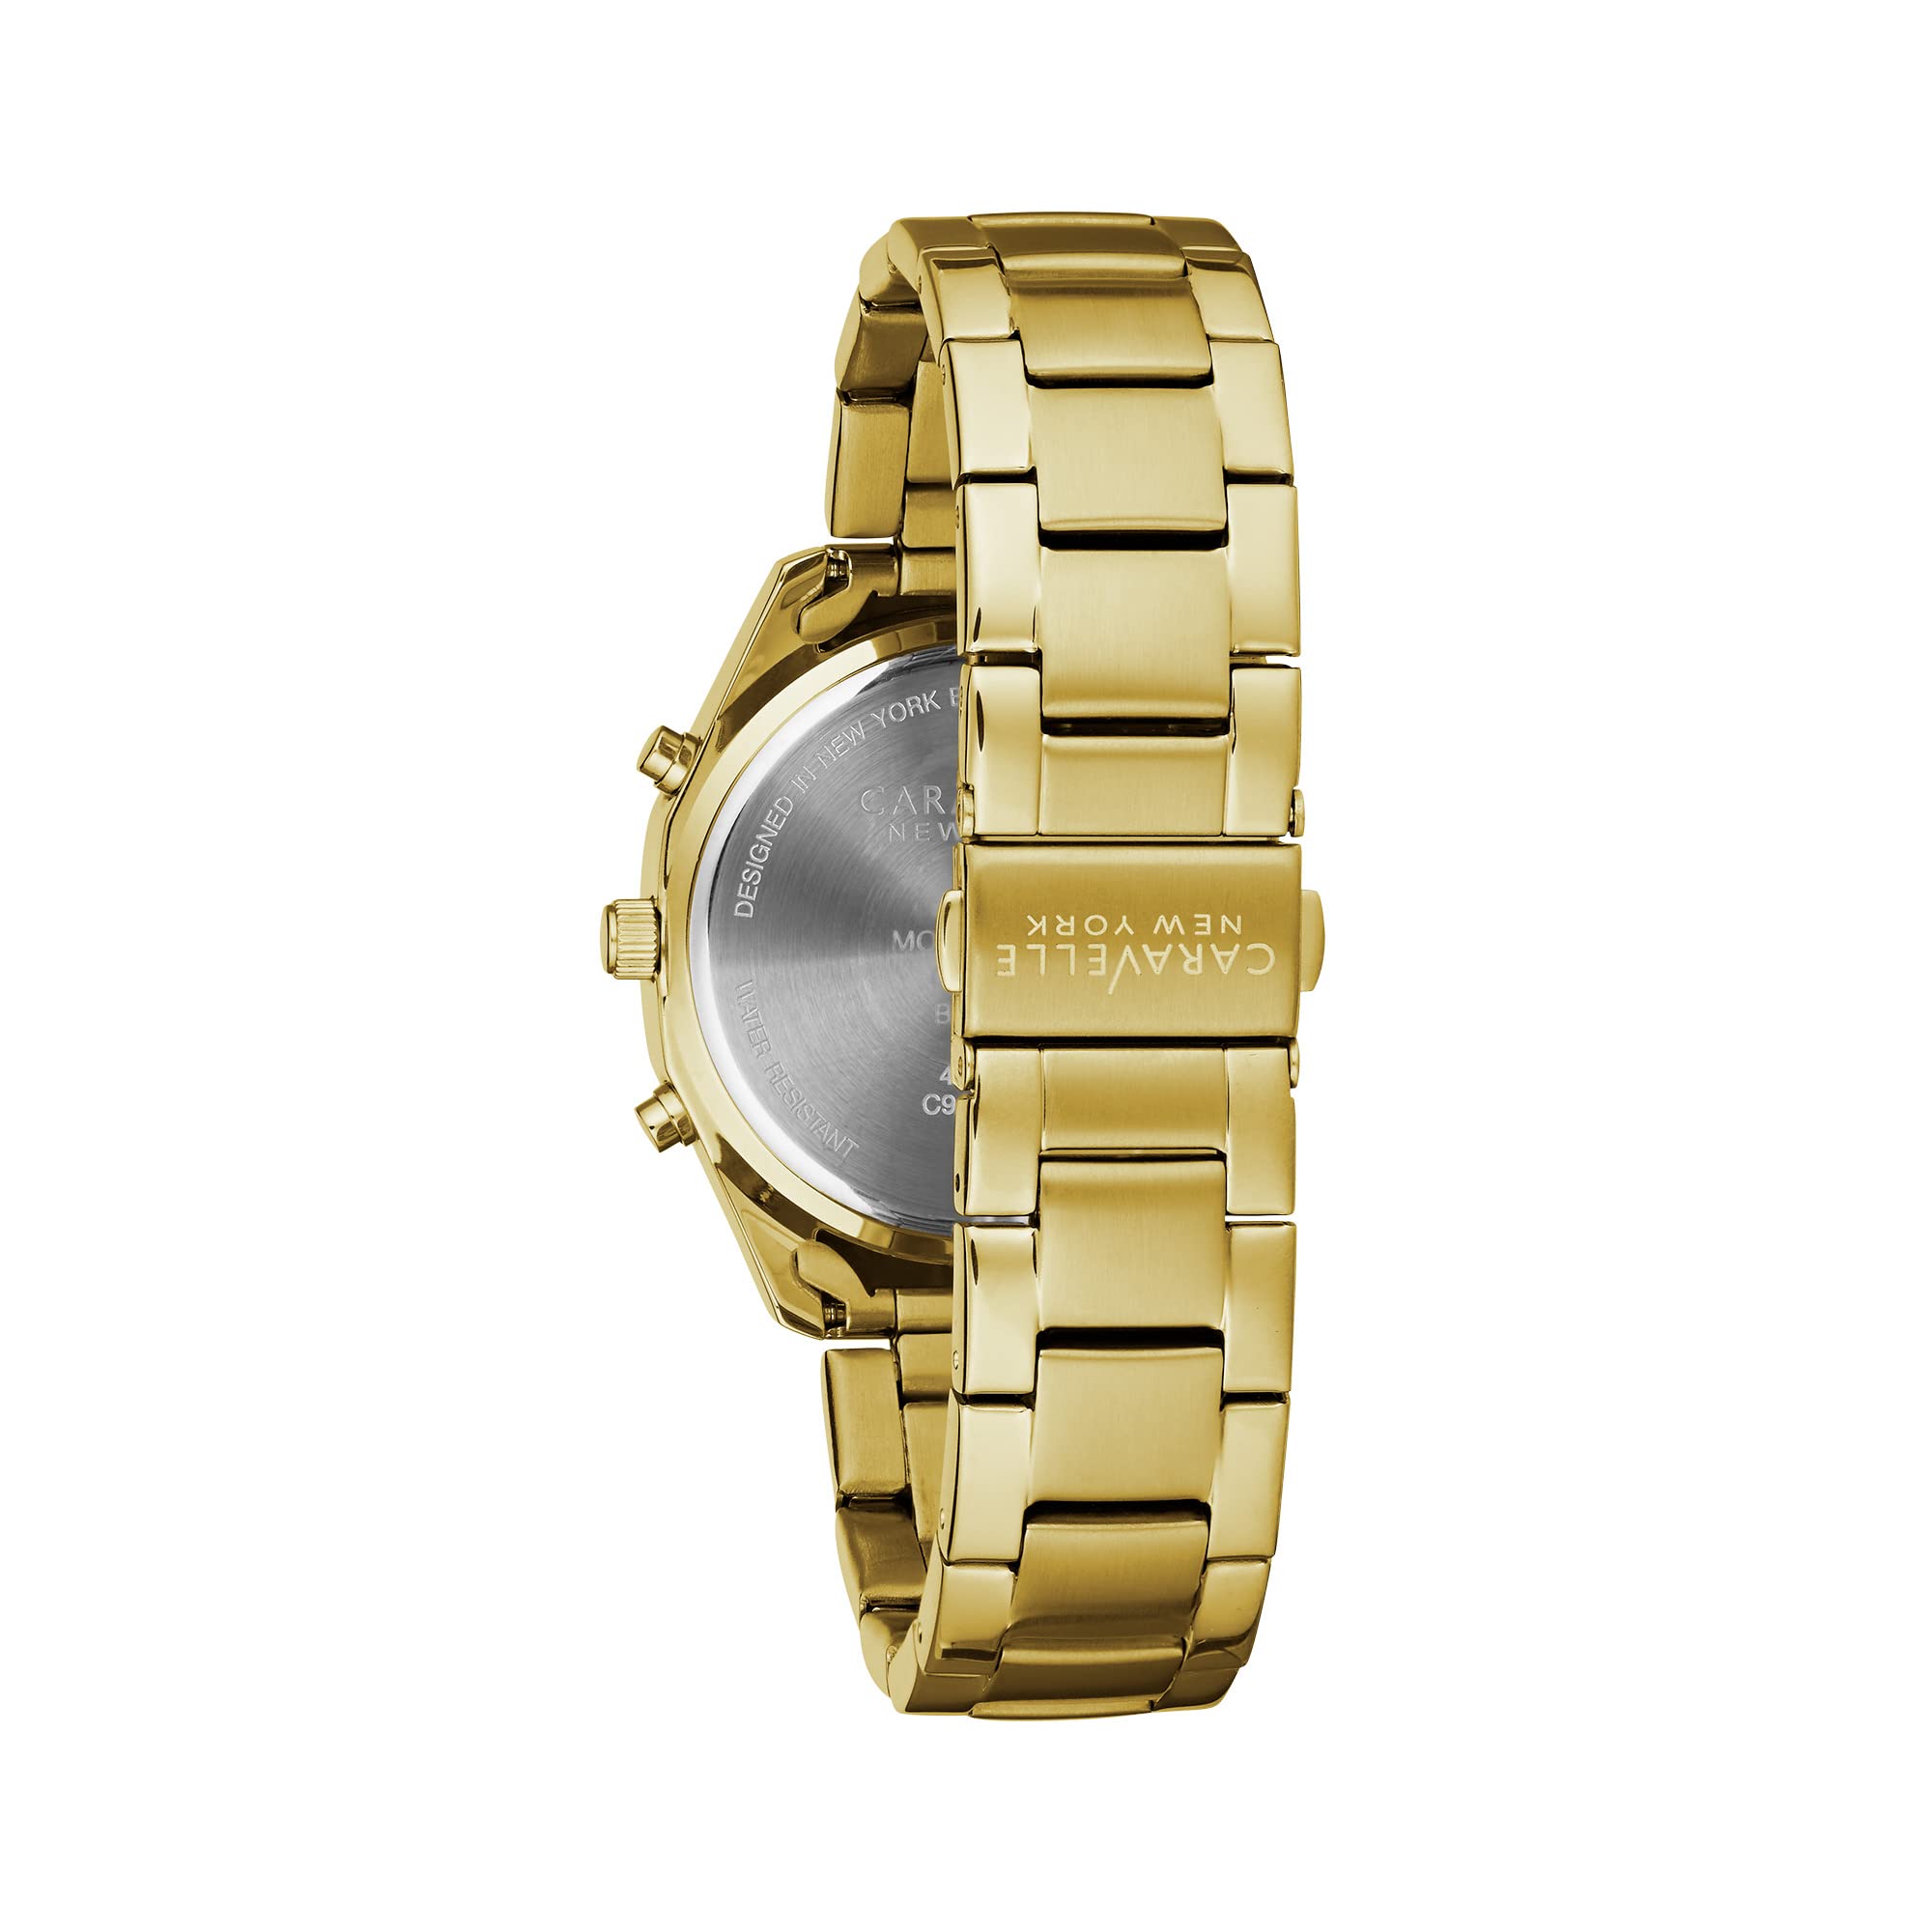 Caravelle by Bulova Sport Chronograph Ladies Watch, Stainless Steel , Gold-Tone (Model: 44L213)